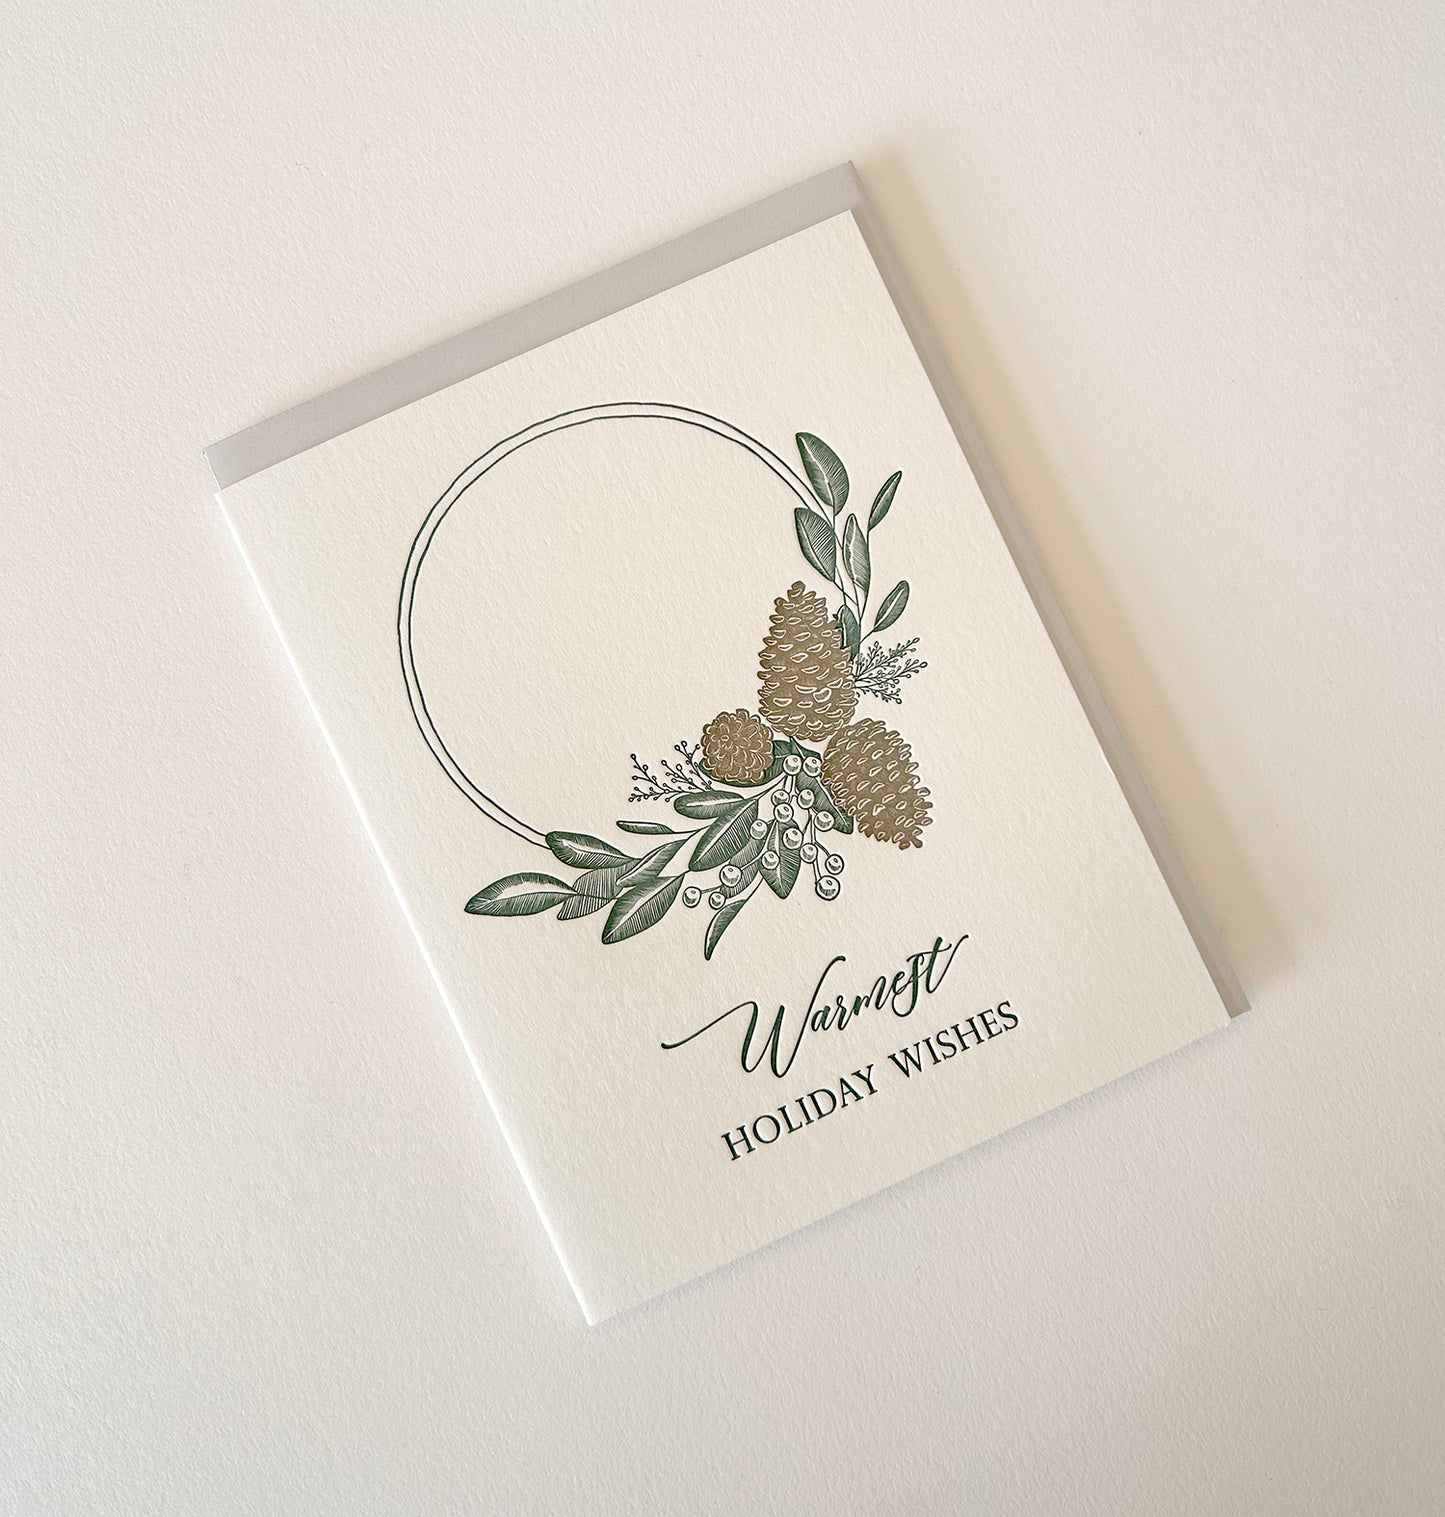 Letterpress holiday card with pinecones and greenery that says "Warmest holiday wishes" by Rust Belt Love